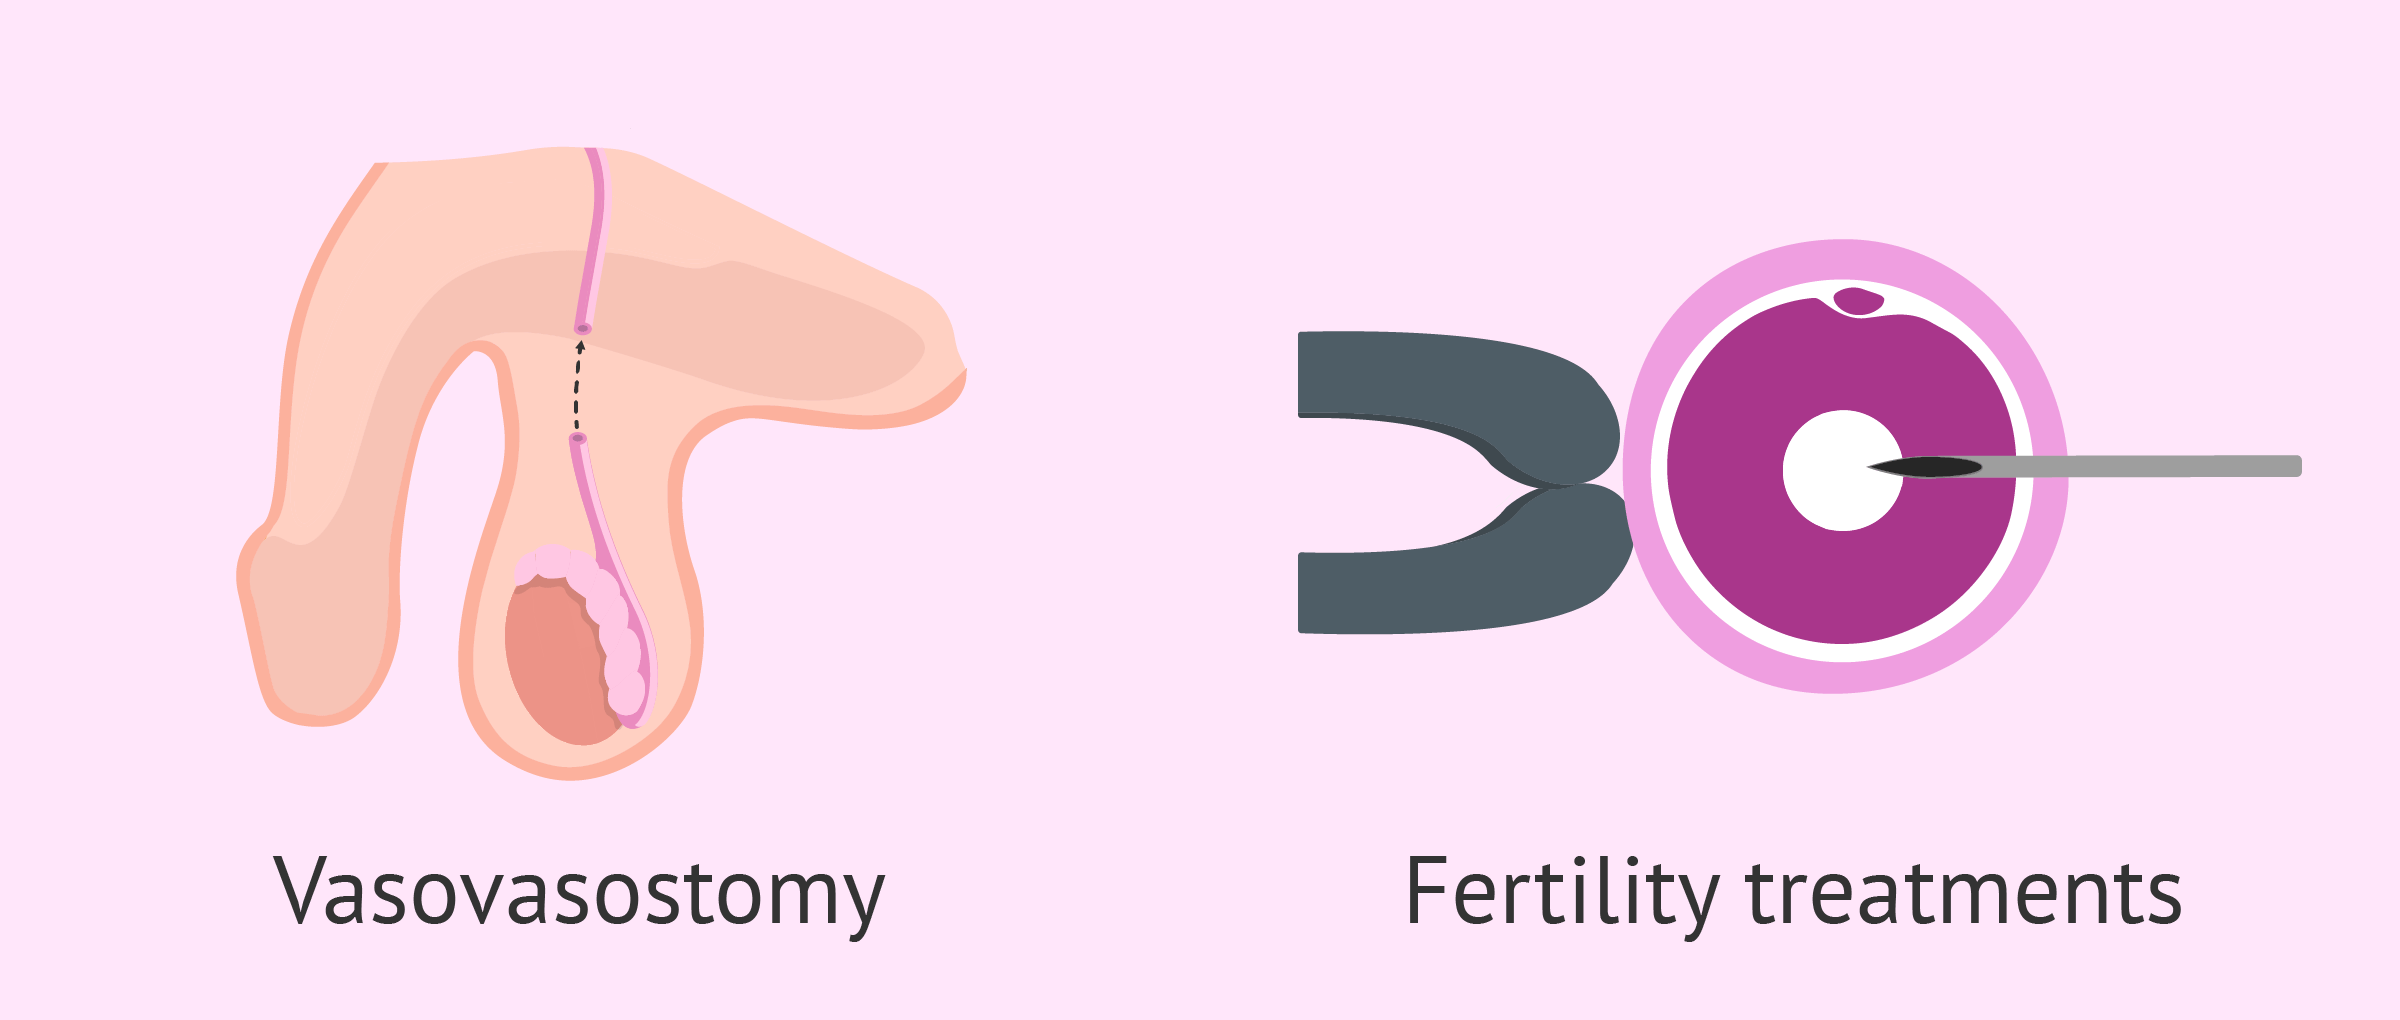 Can You Get Pregnant After a Vasectomy? - Your Realistic Possibility